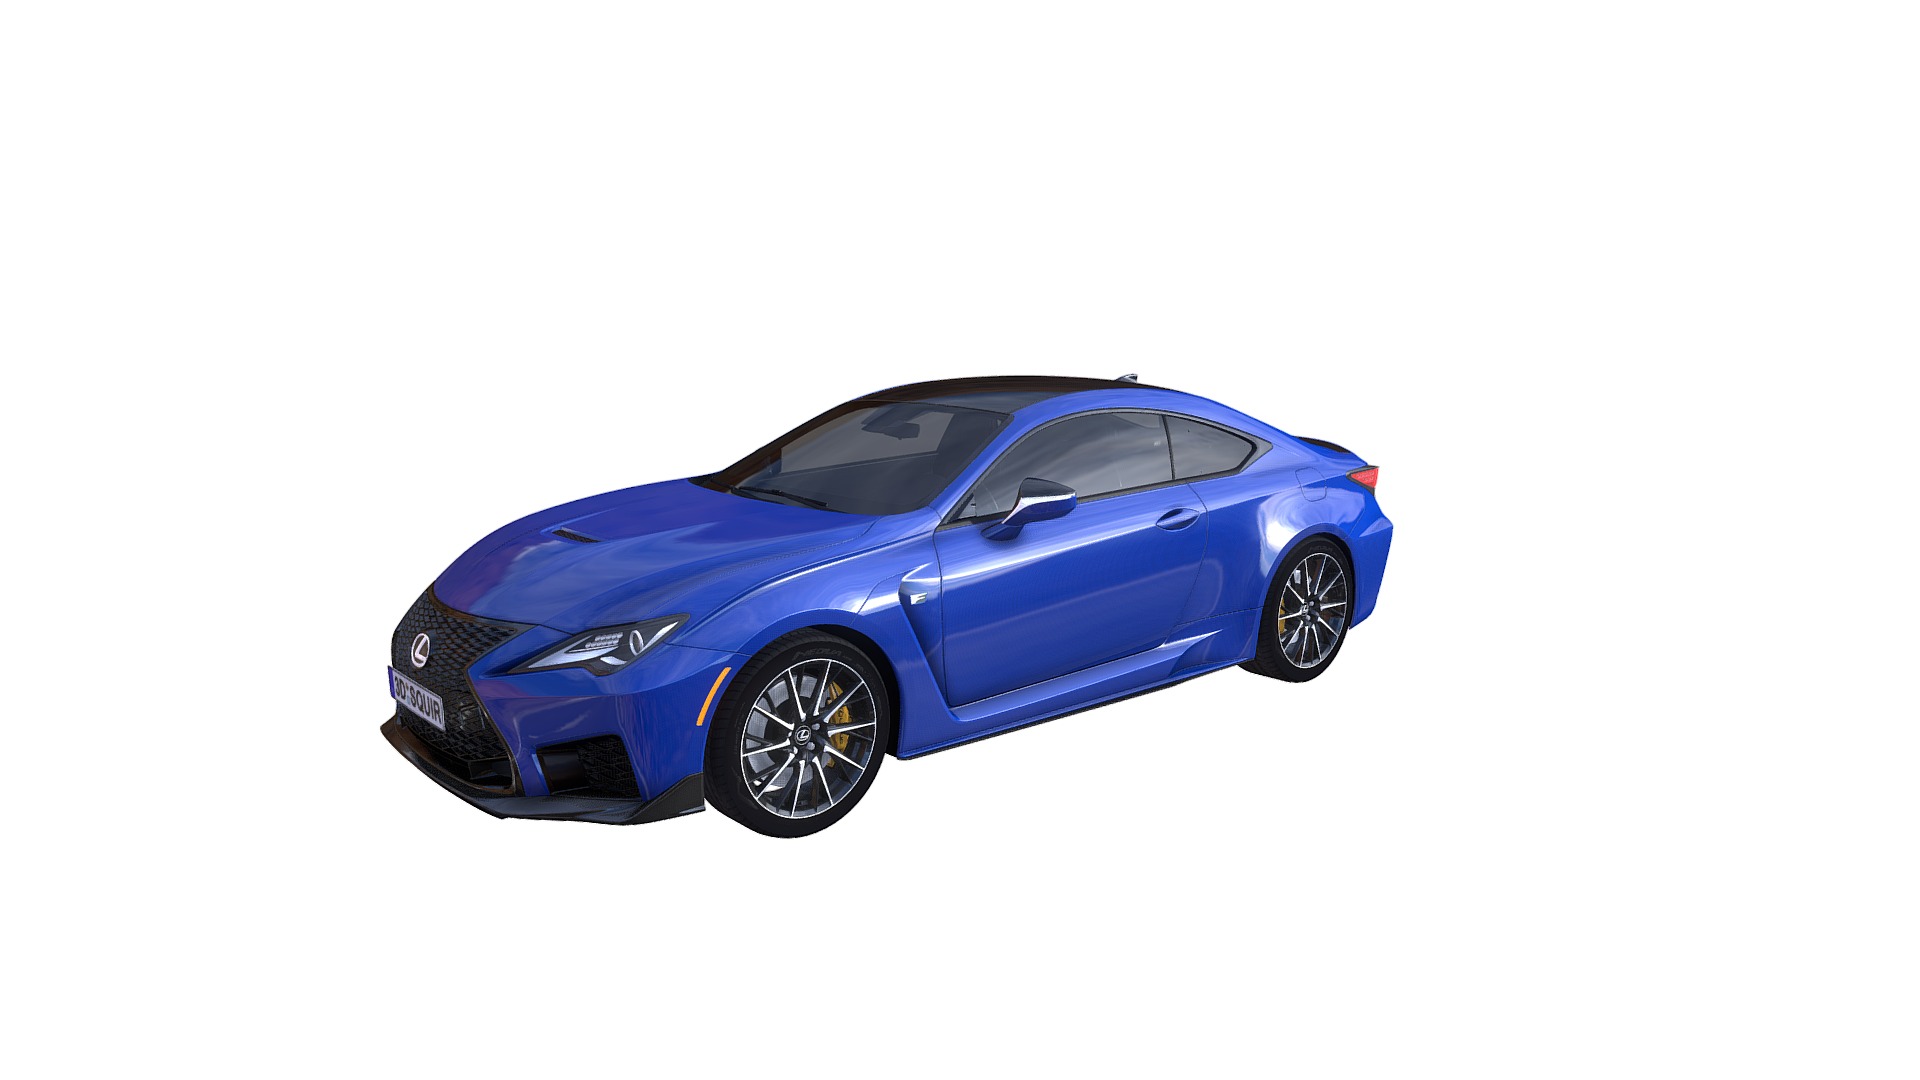 3D model Lexus RC F 2020 - This is a 3D model of the Lexus RC F 2020. The 3D model is about a blue sports car.